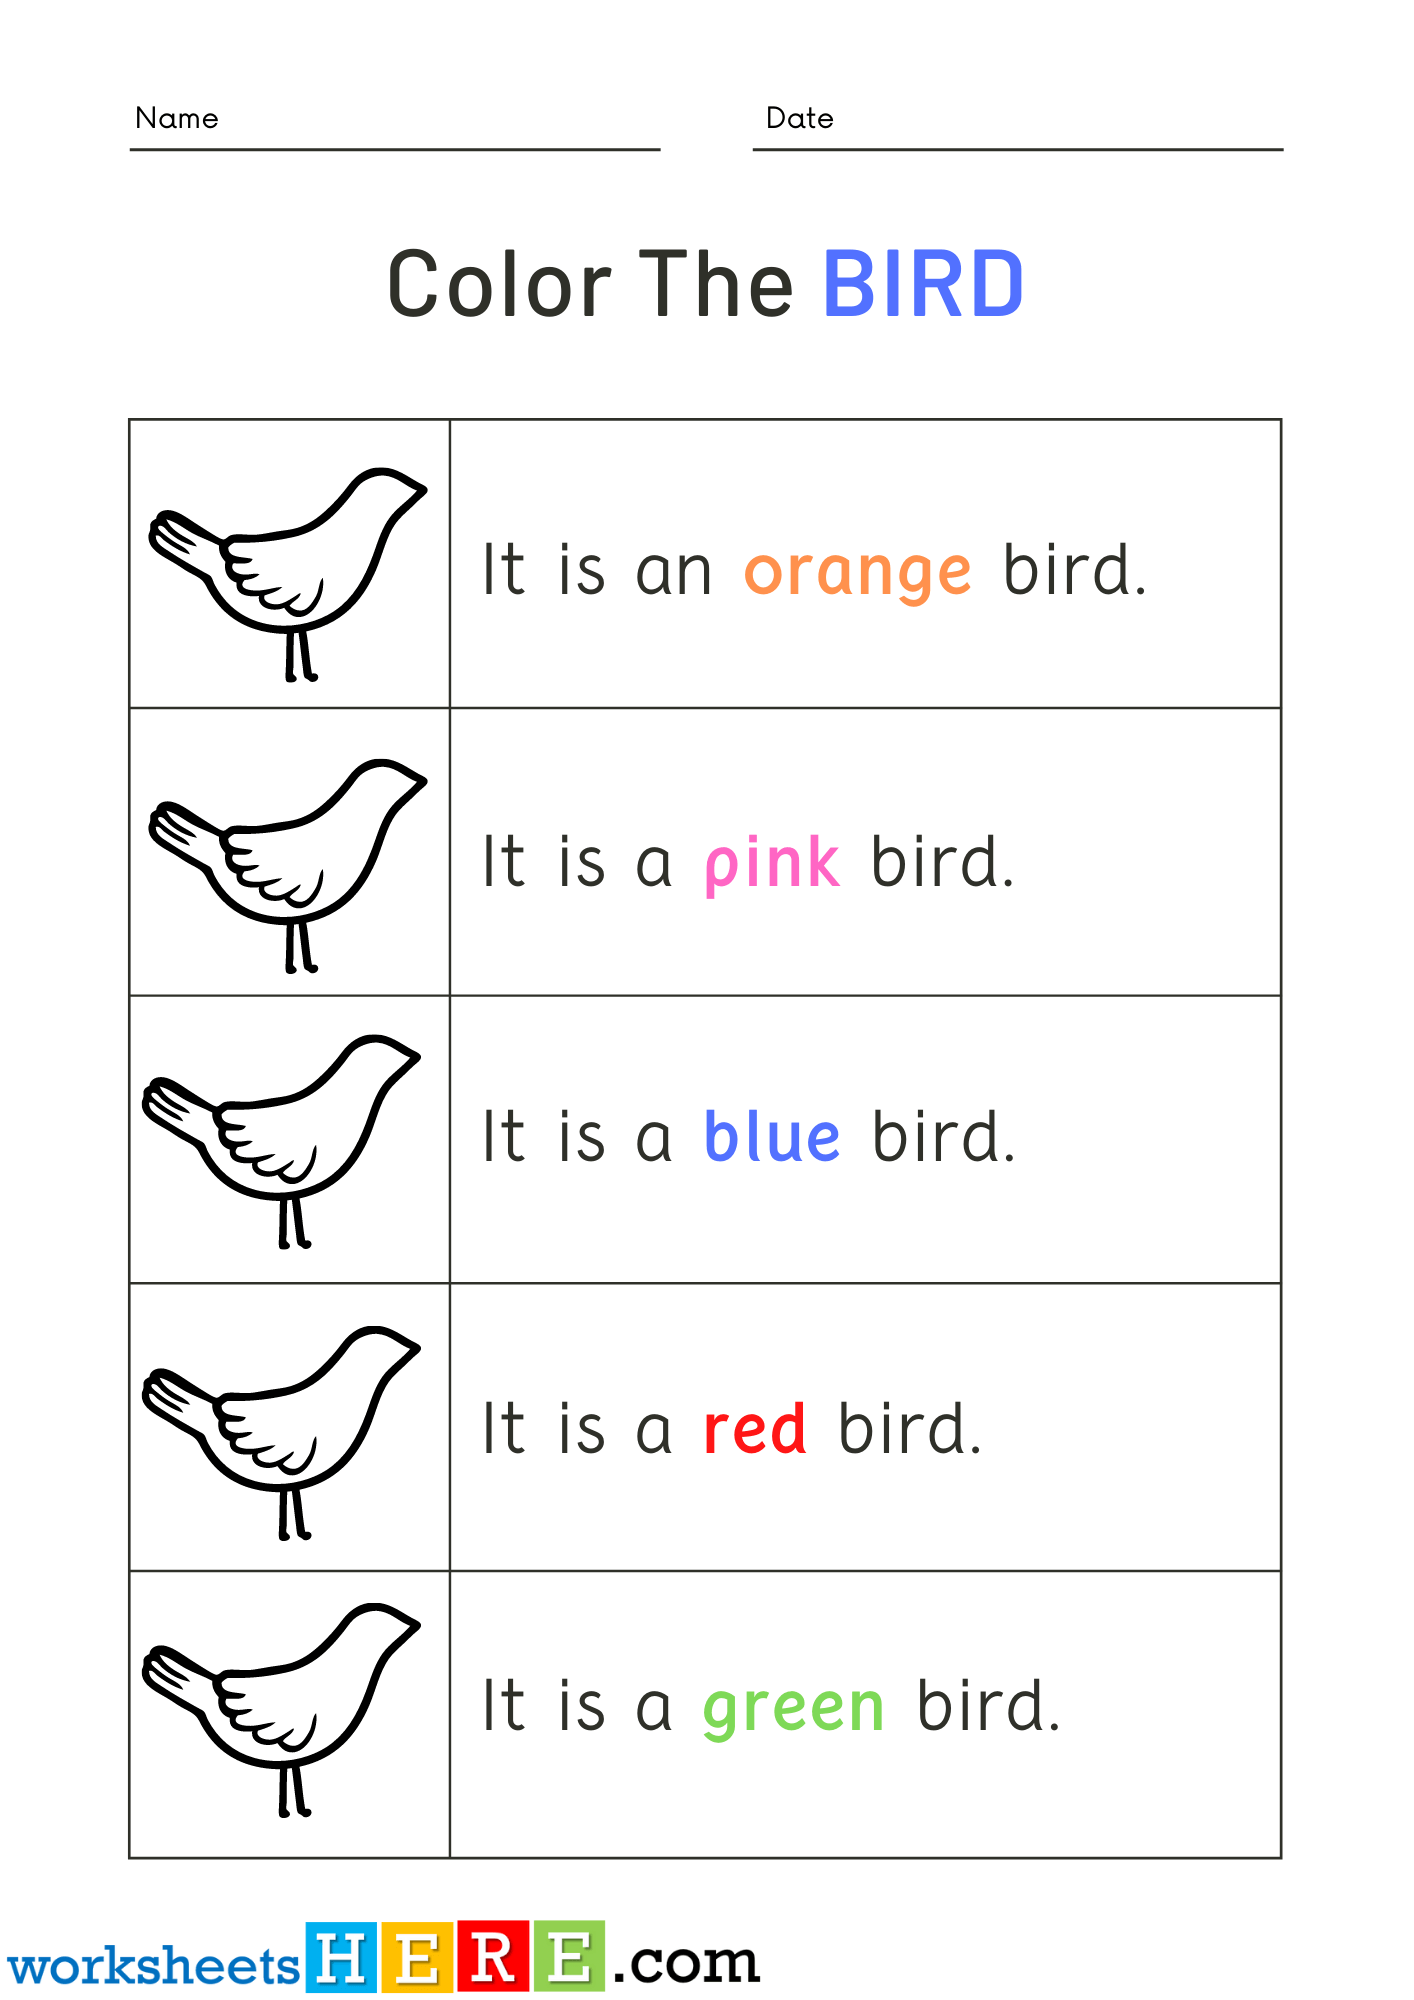 Read Words and Color Bird Pictures Activity PDF Worksheets For Kindergarten